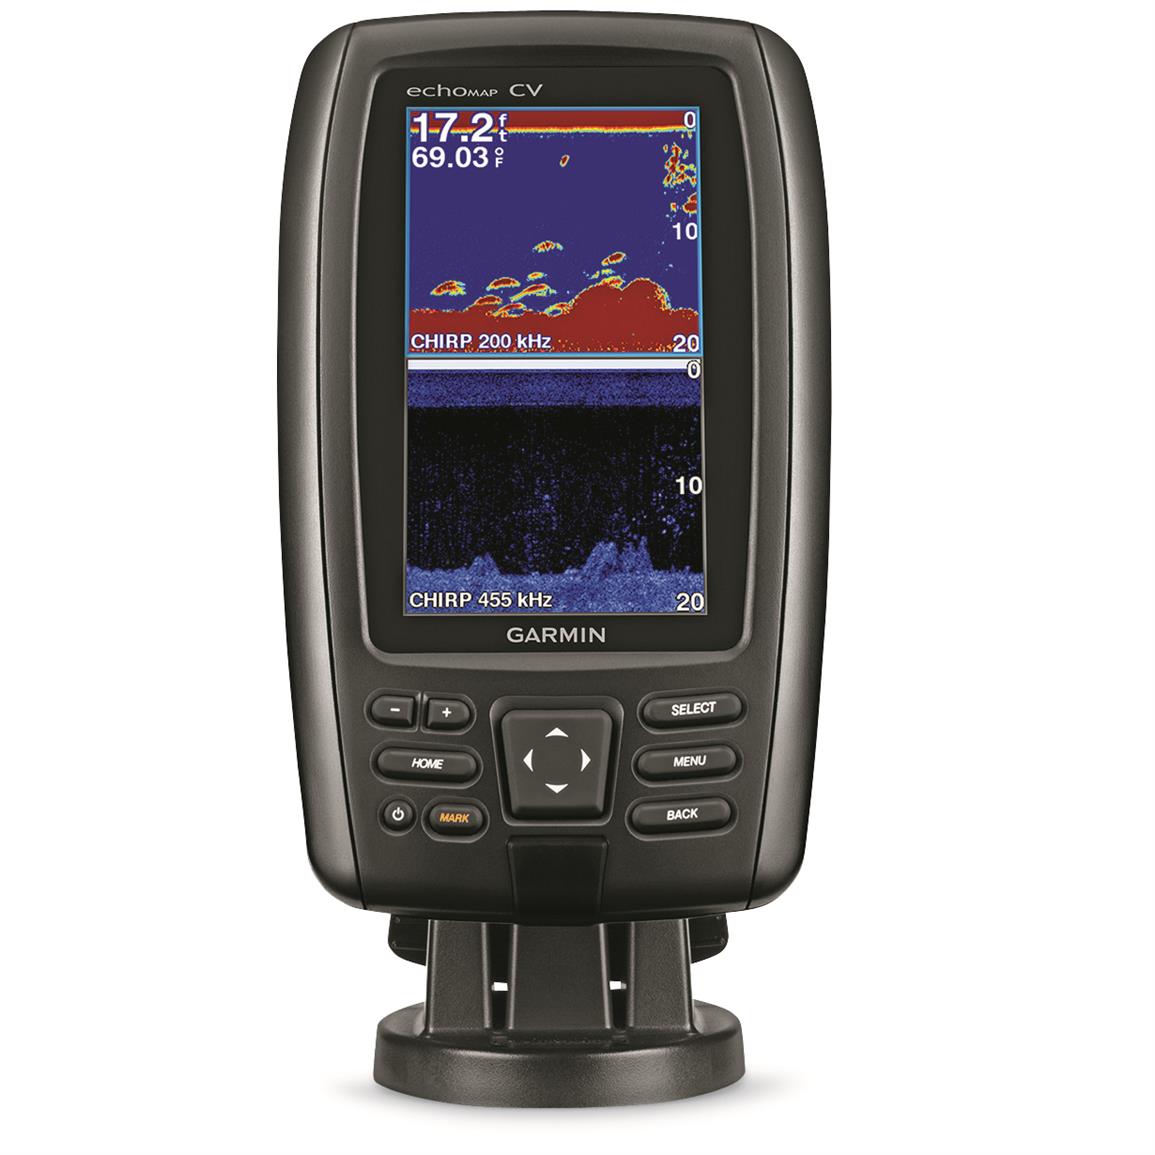 a-complete-guide-on-how-to-read-a-garmin-fishfinder